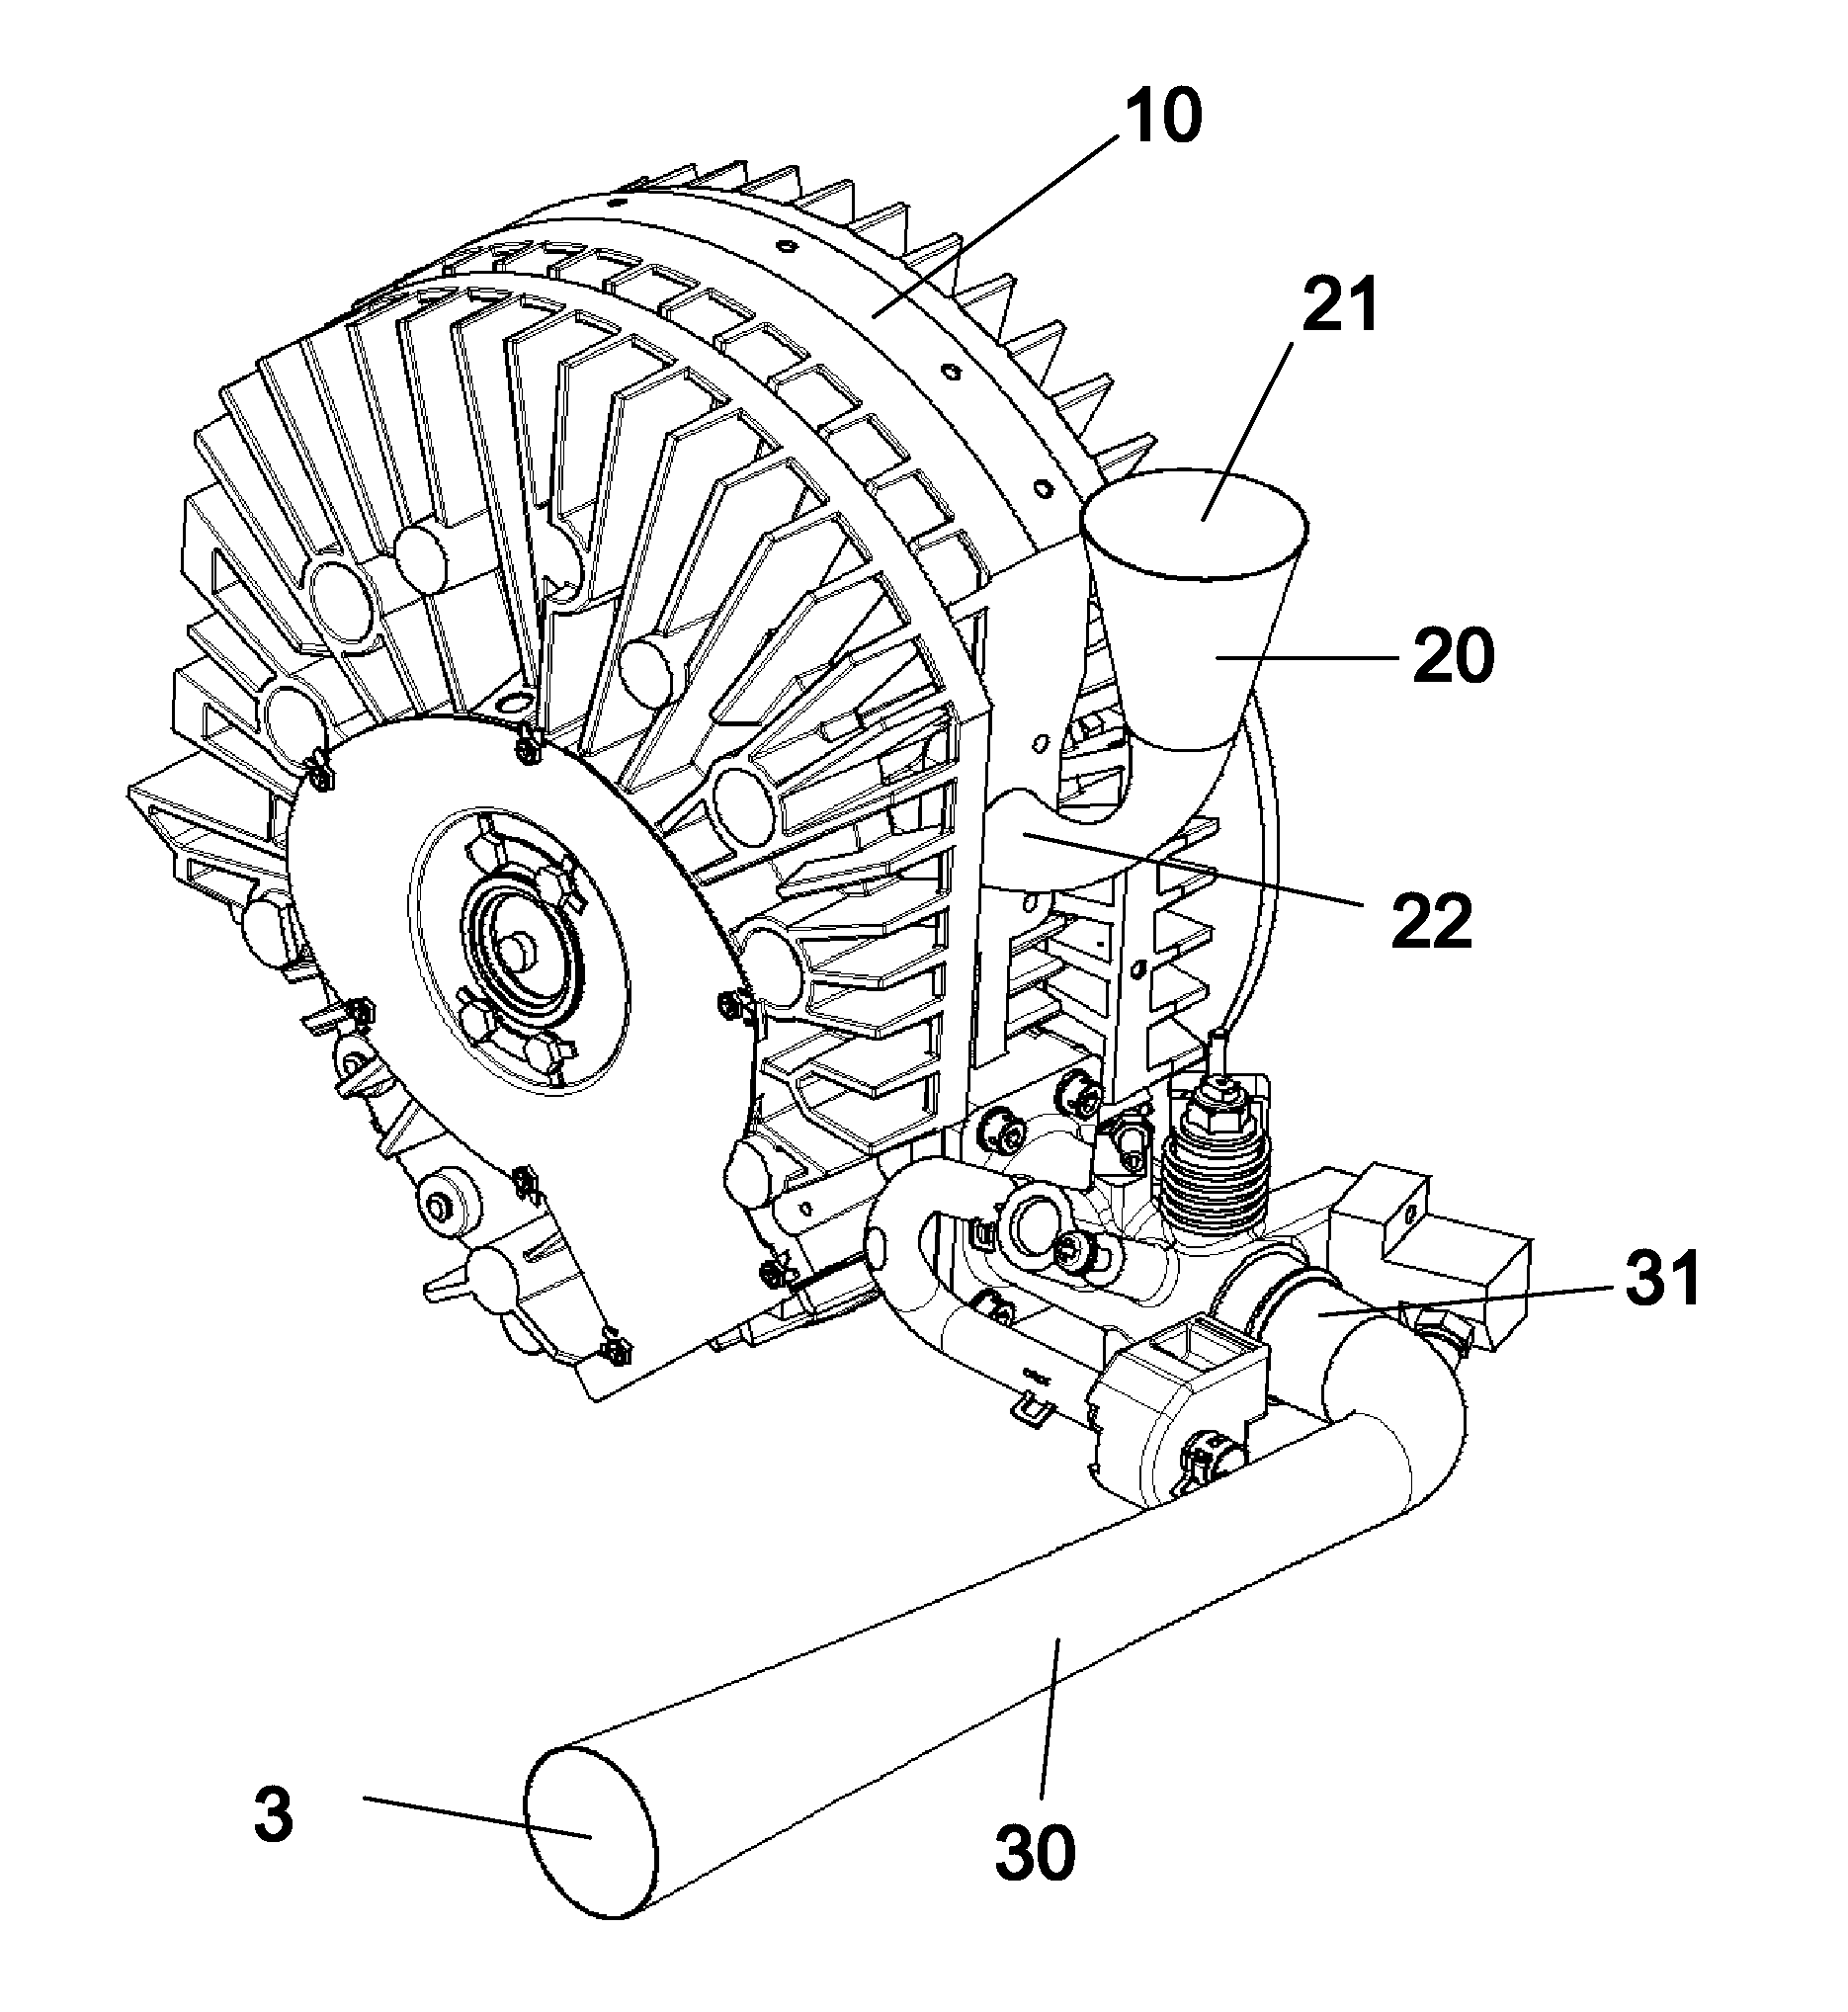 Intake/outlet pipe optimization method for rotary engine